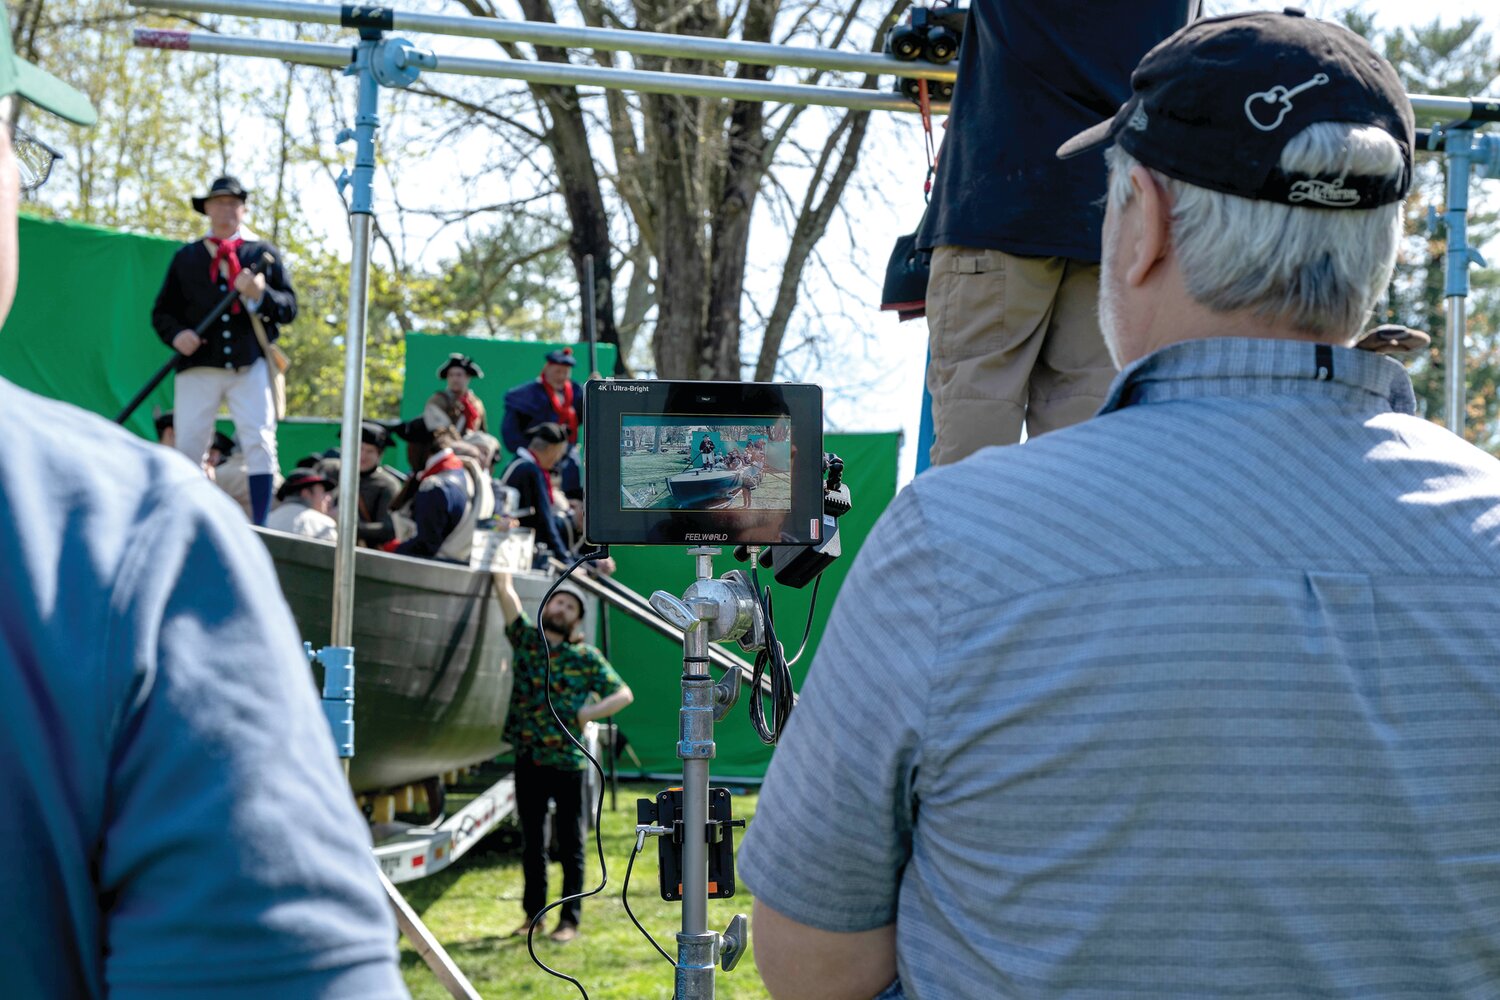 The reenactors shoot a river crossing scene in front of green screens. The river will be digitally added later.